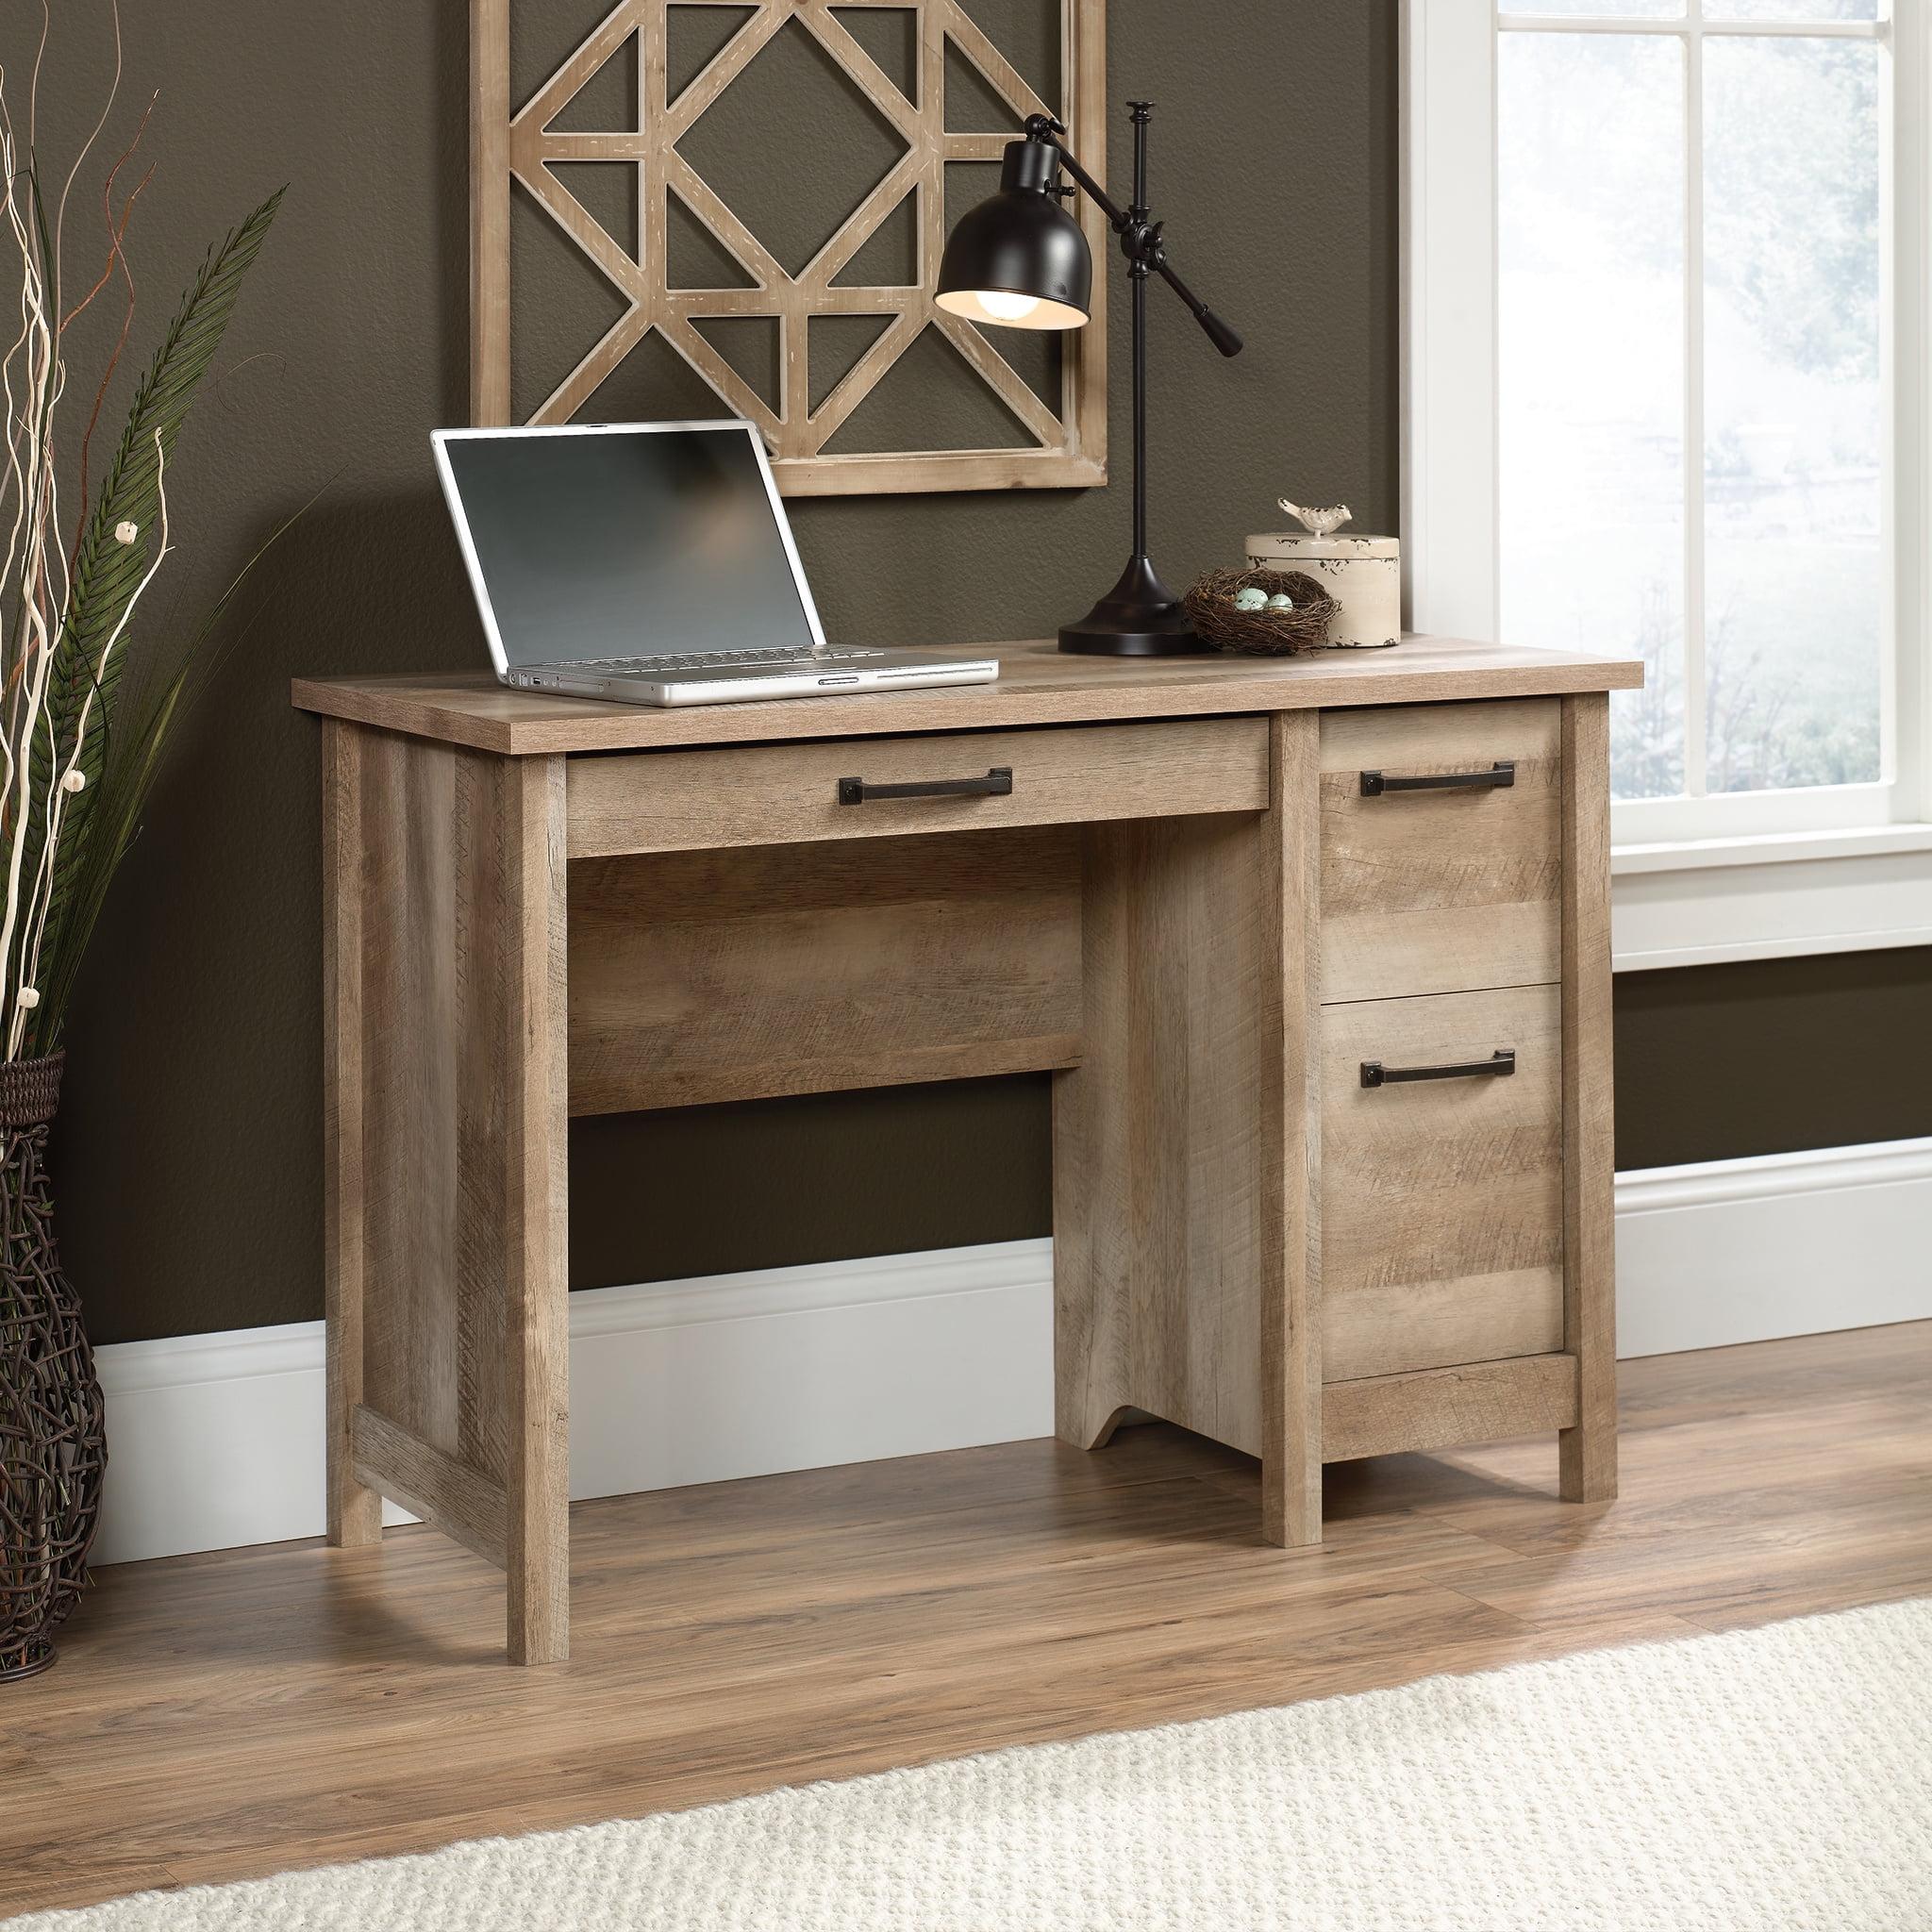 Rustic-Inspired Lintel Oak Finish Writing Desk with Drawer and Filing Cabinet